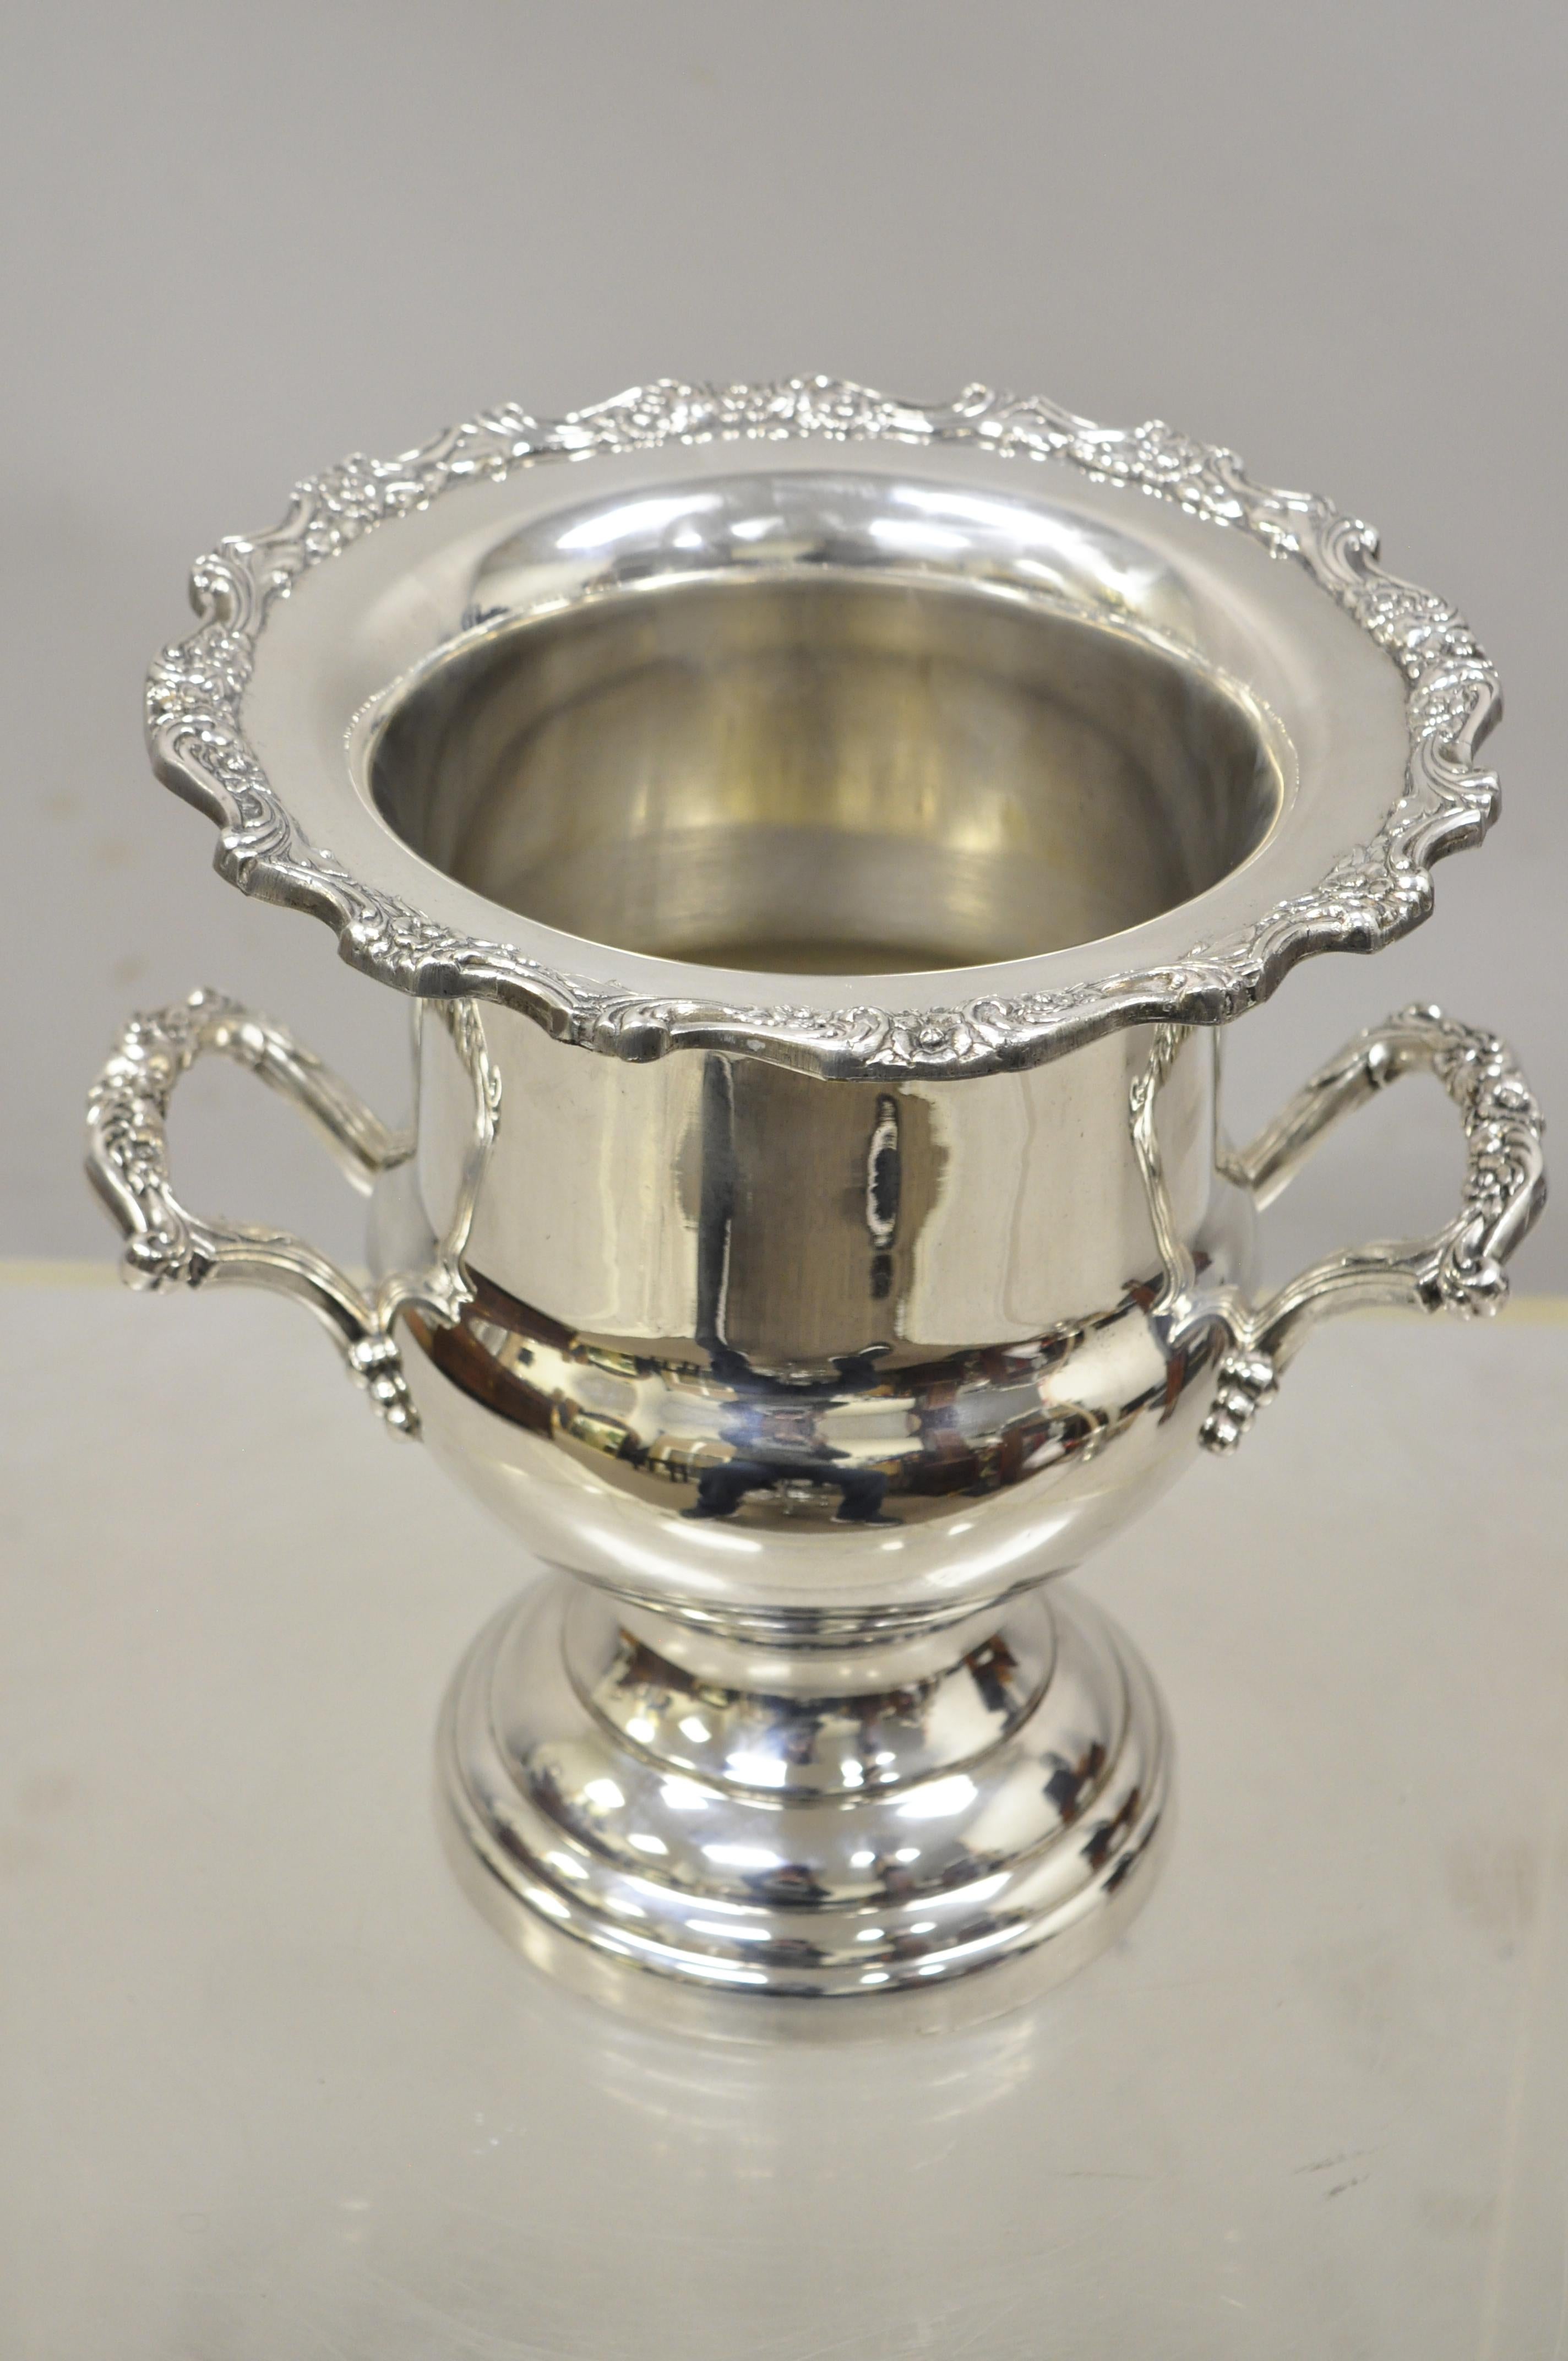 Vintage English Regency silver plate trophy urn twin handle champagne ice bucket, circa mid-20th century. Measurements: 10.5